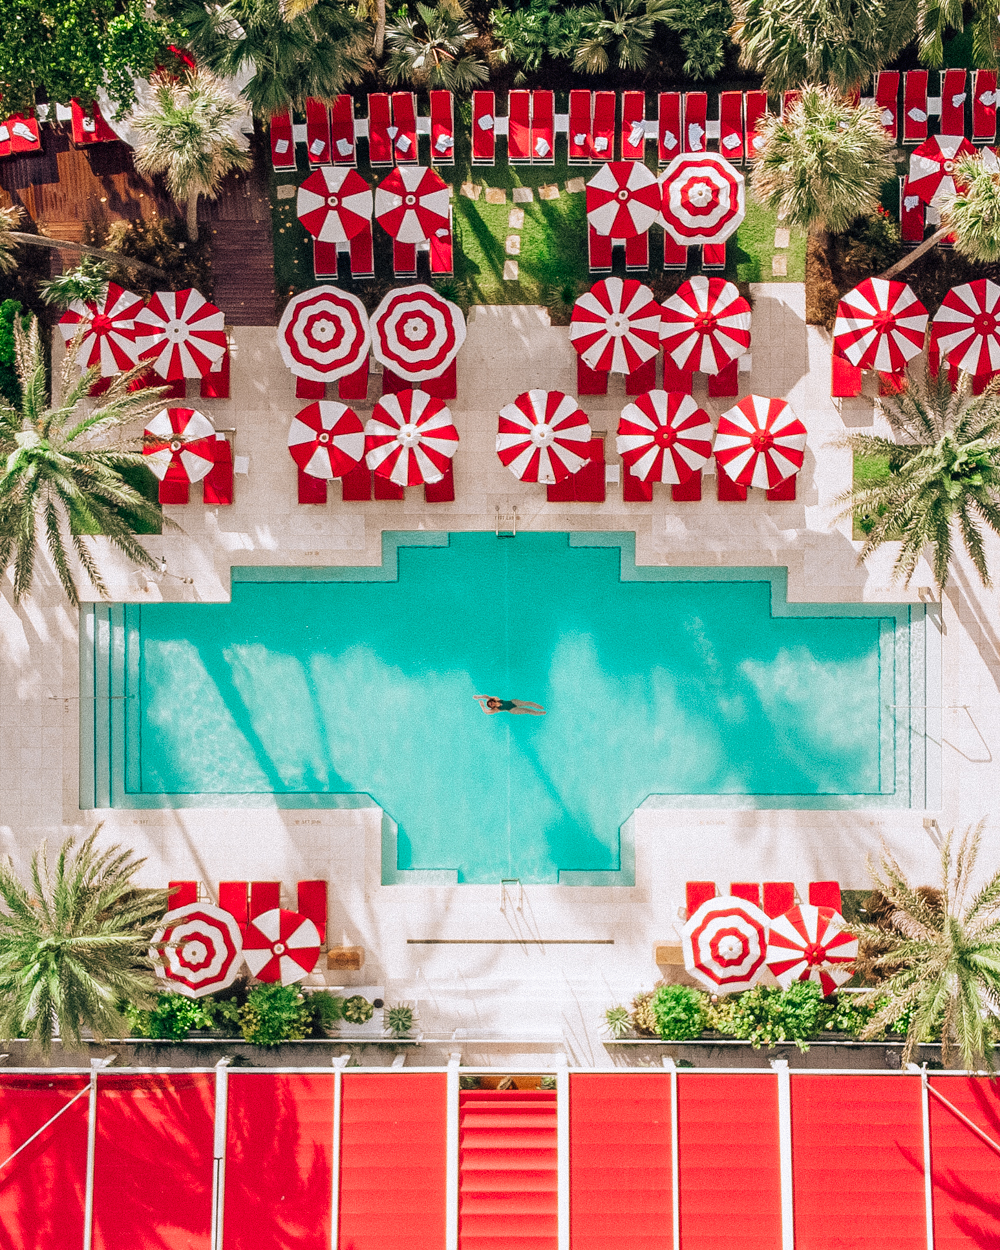 Isabella in the Faena Pool